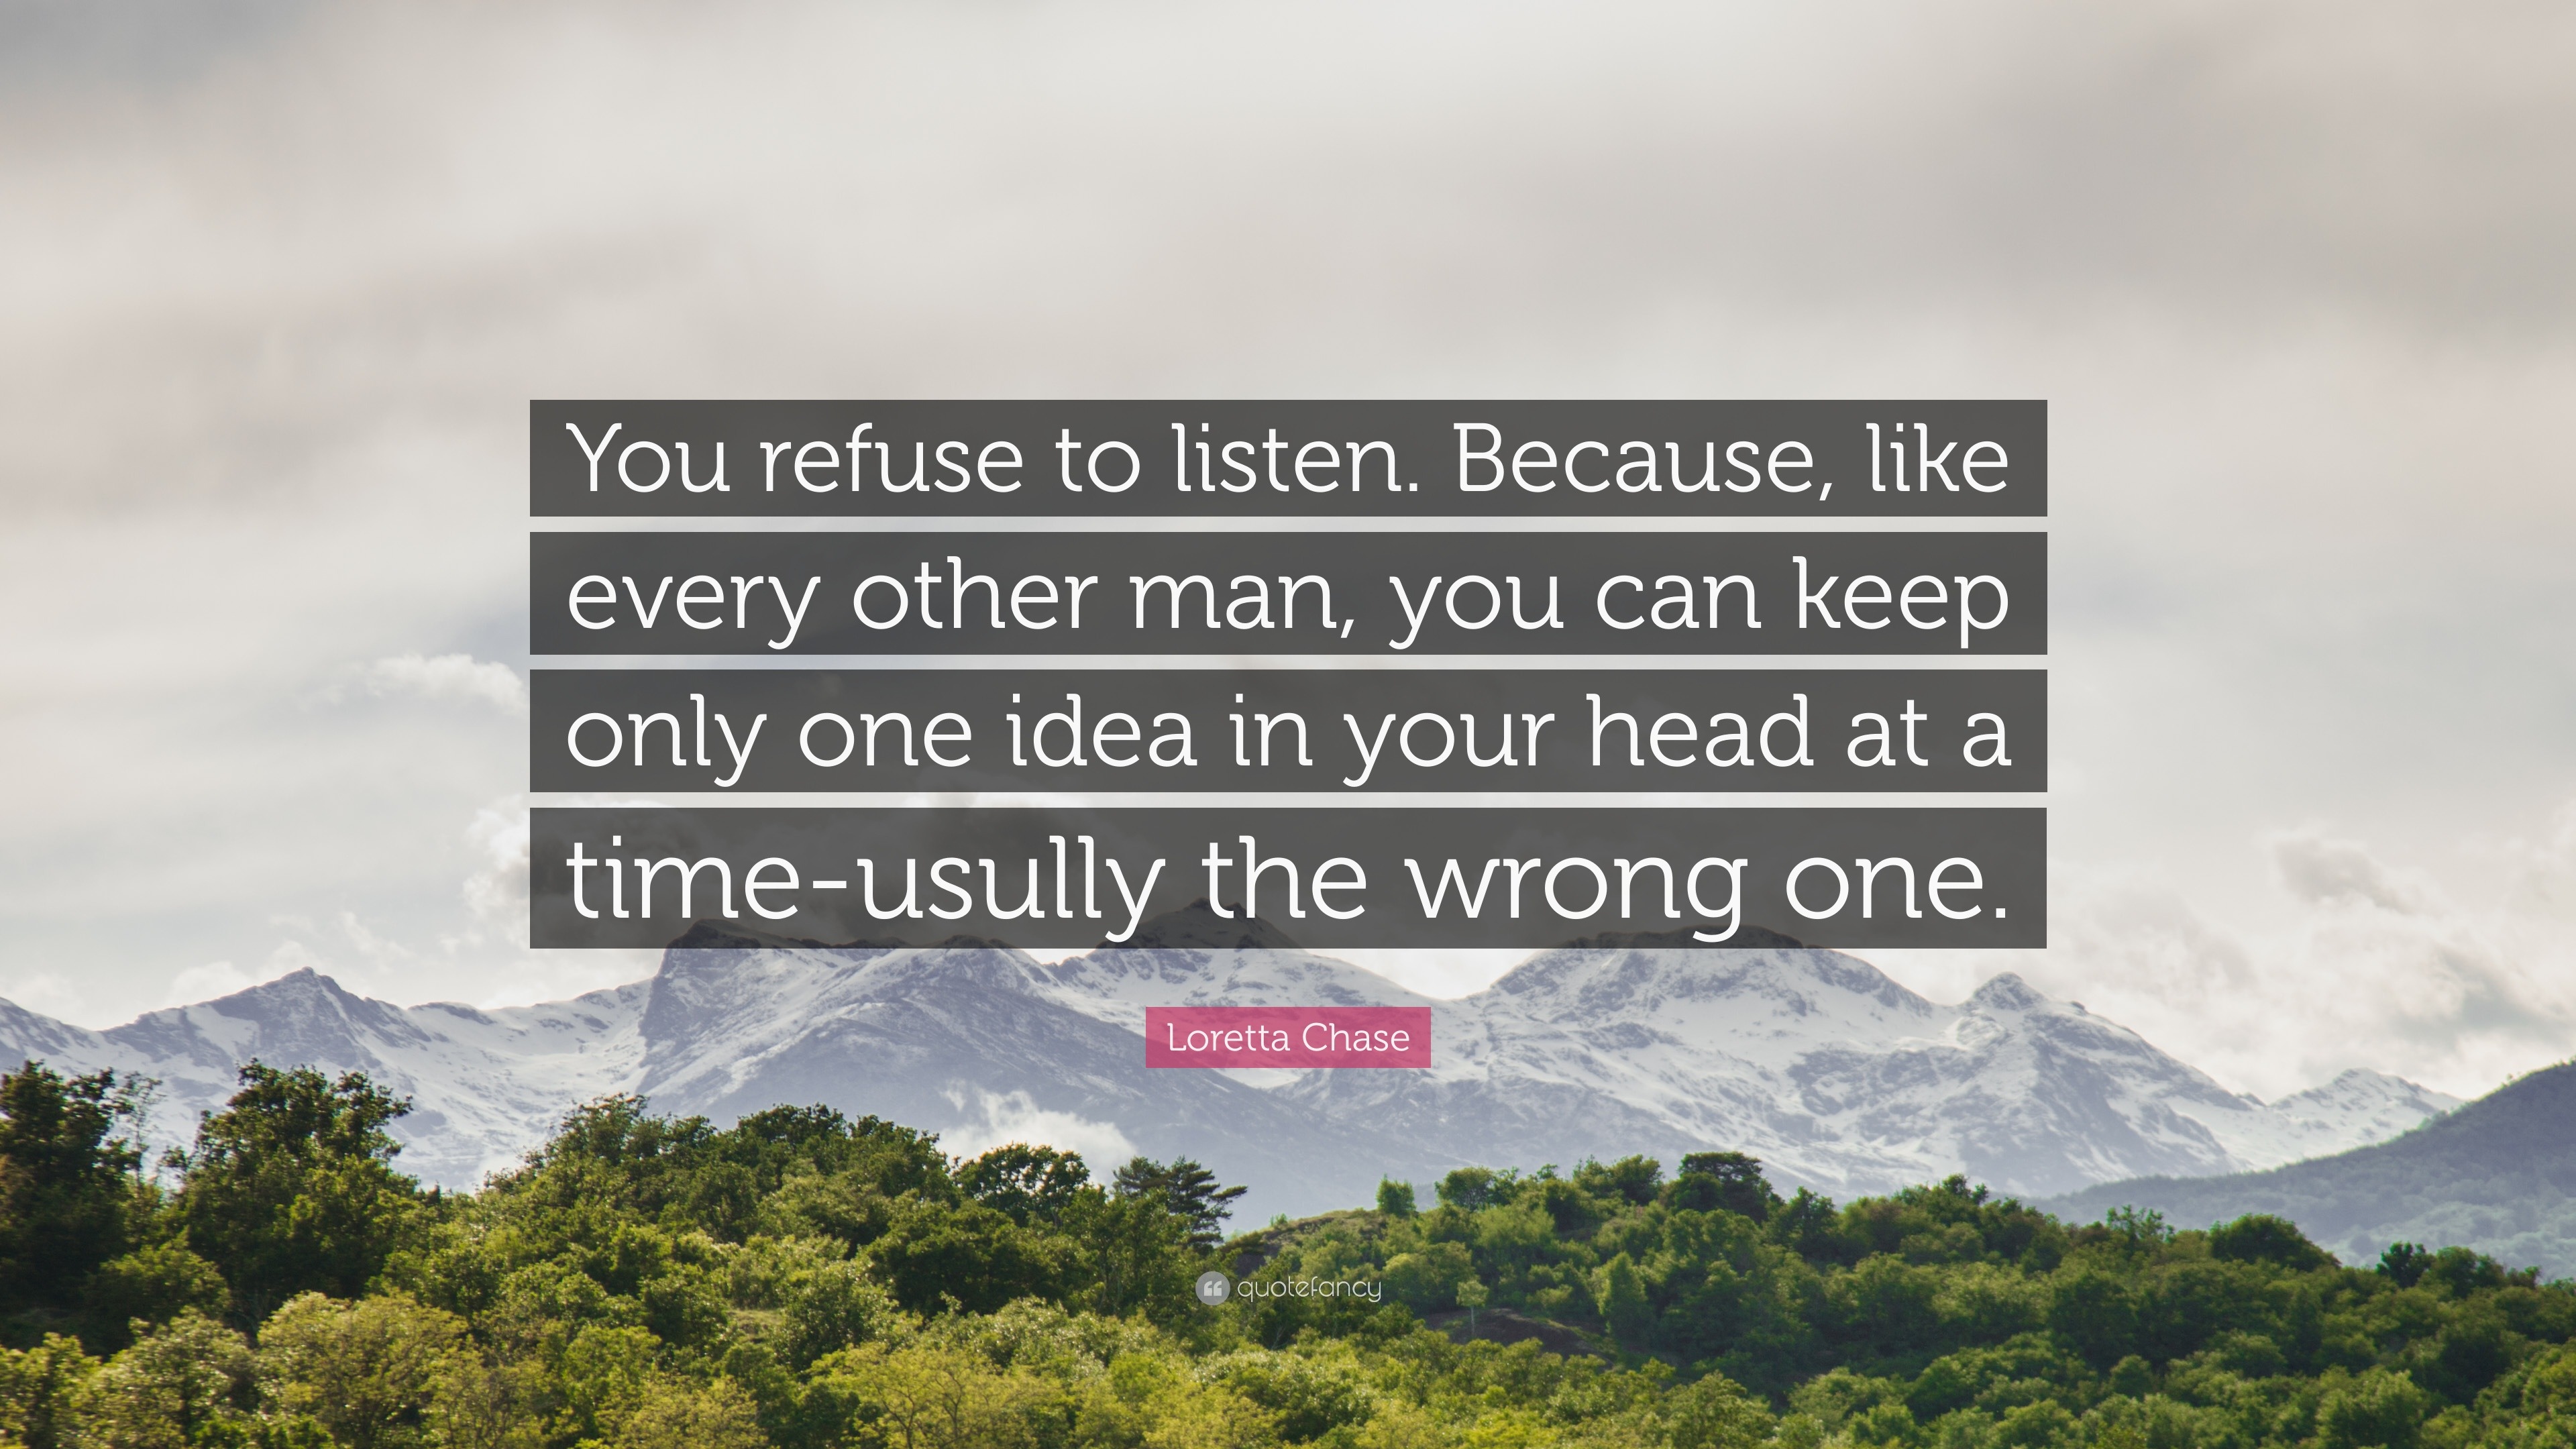 Loretta Chase Quote: “You refuse to listen. Because, like every other ...